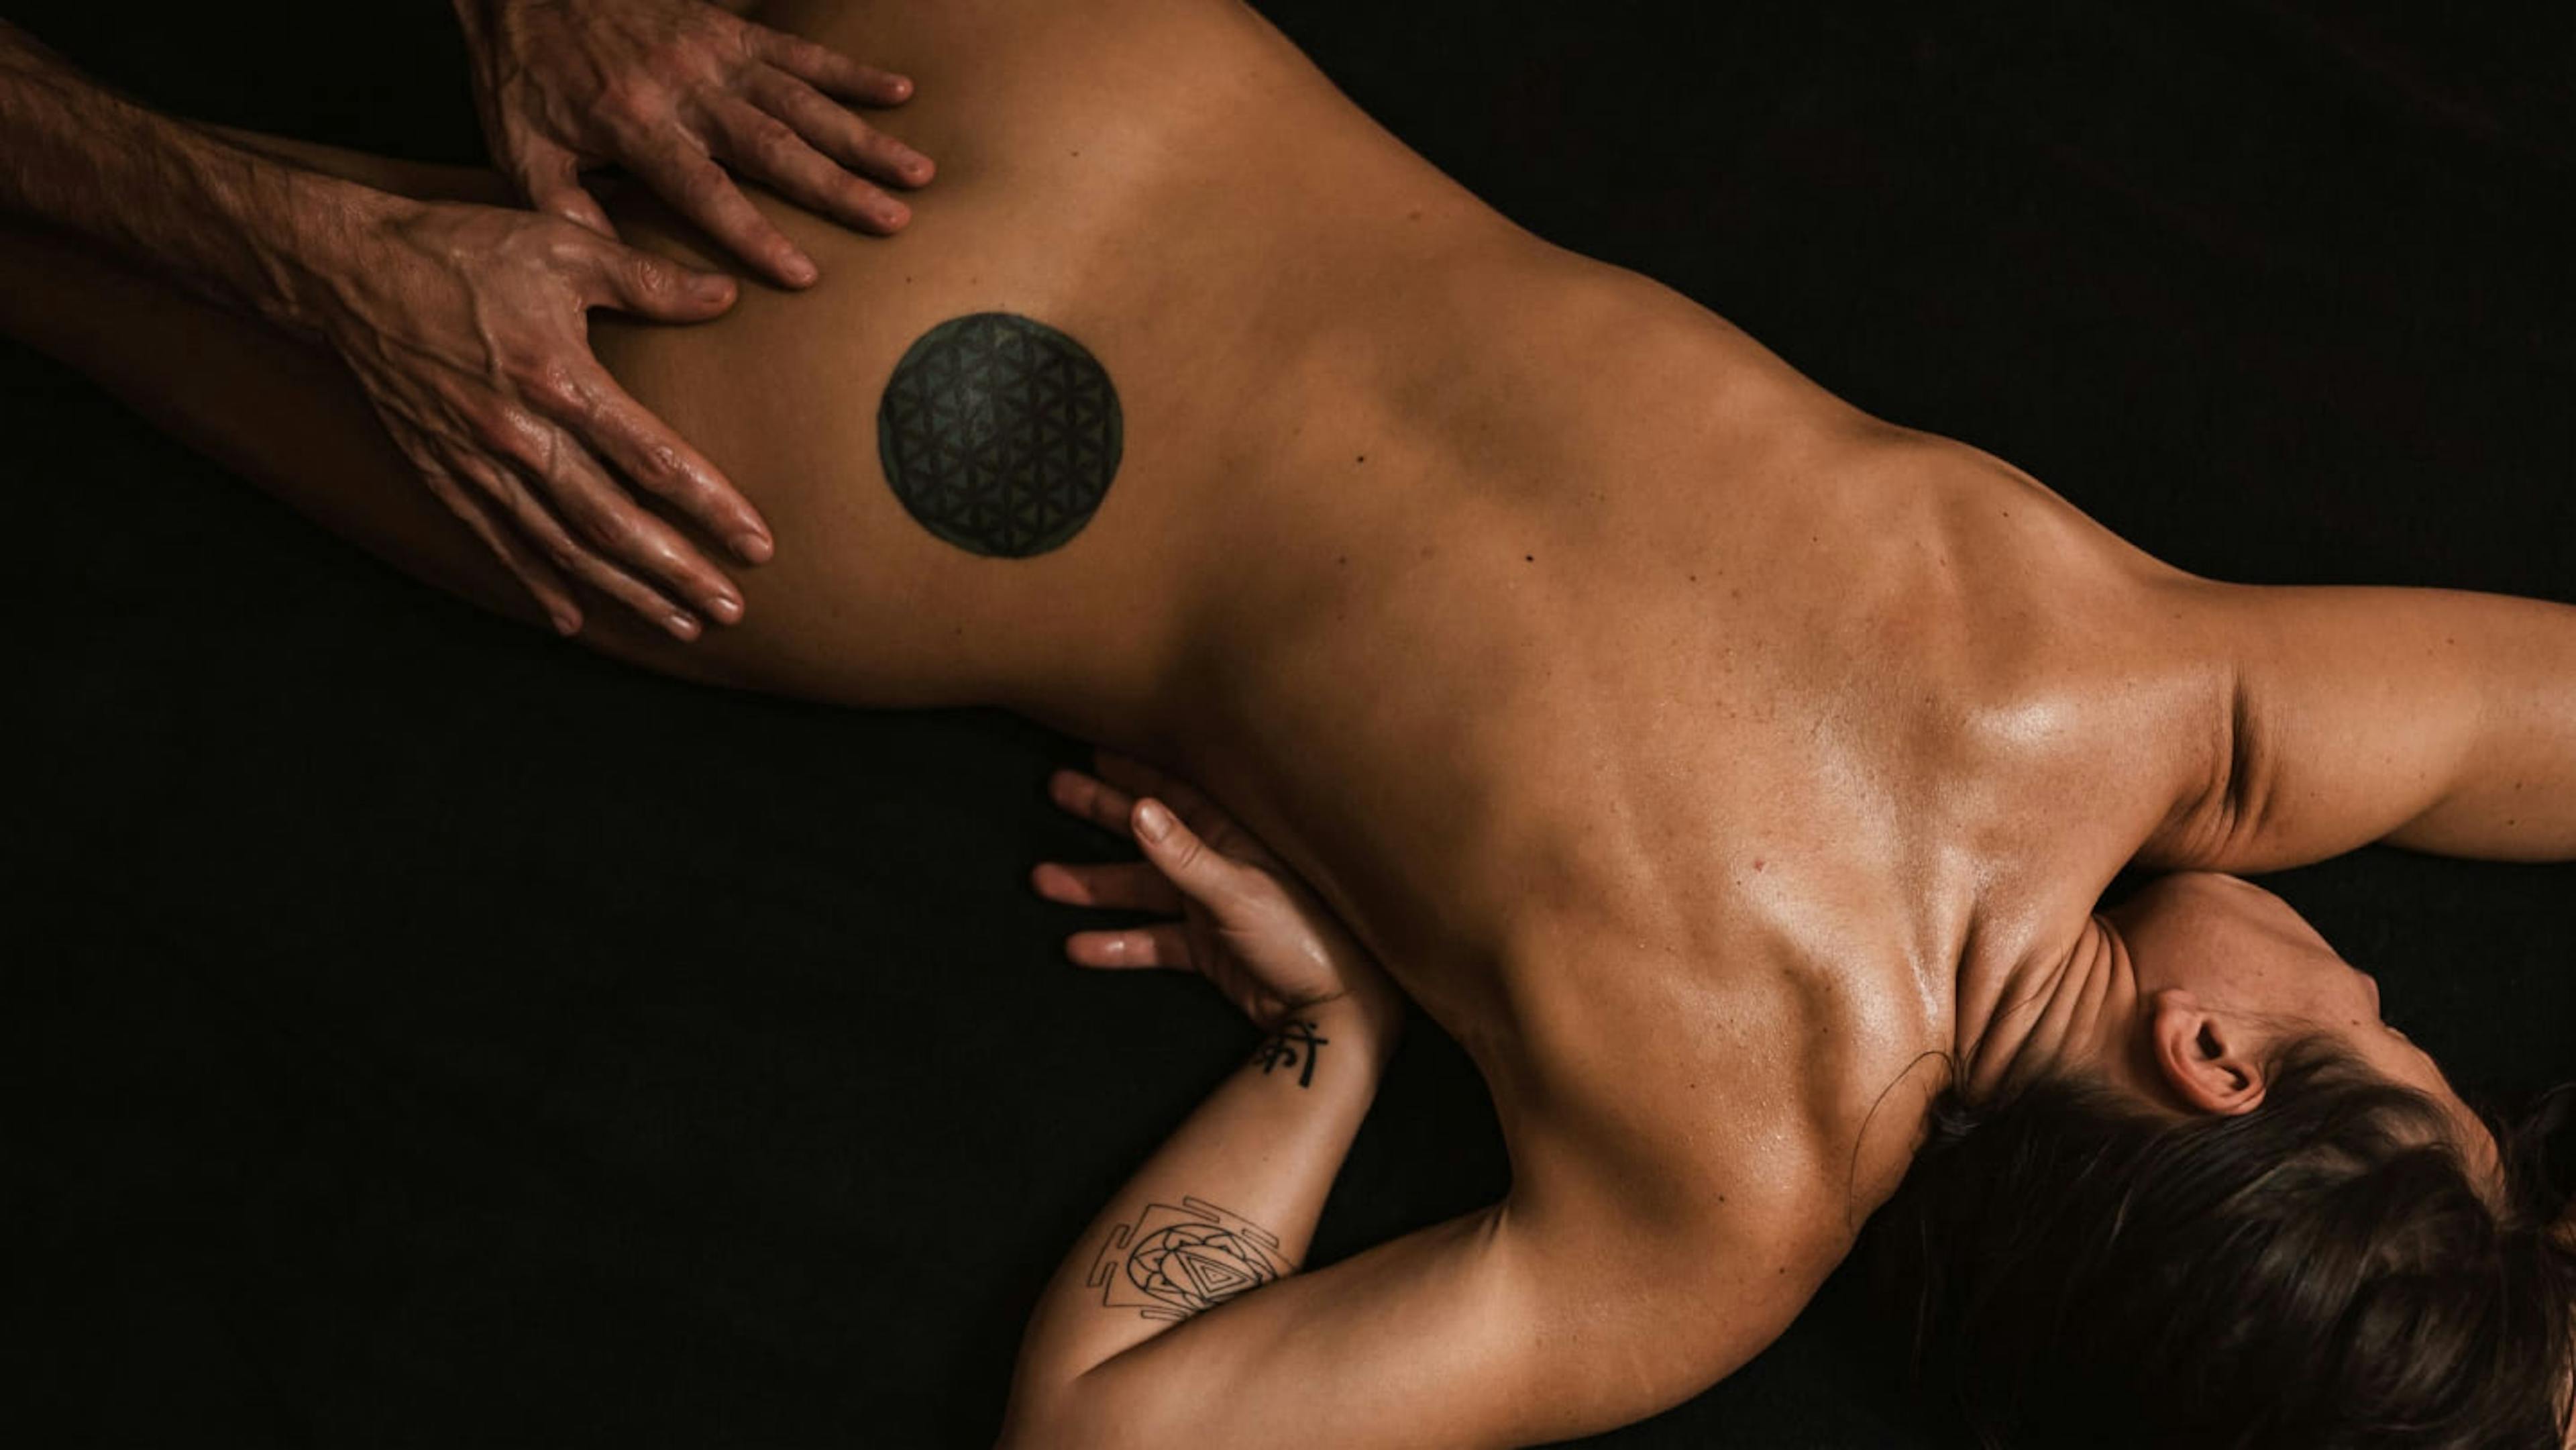 A man performs tantric massage on a female partner.